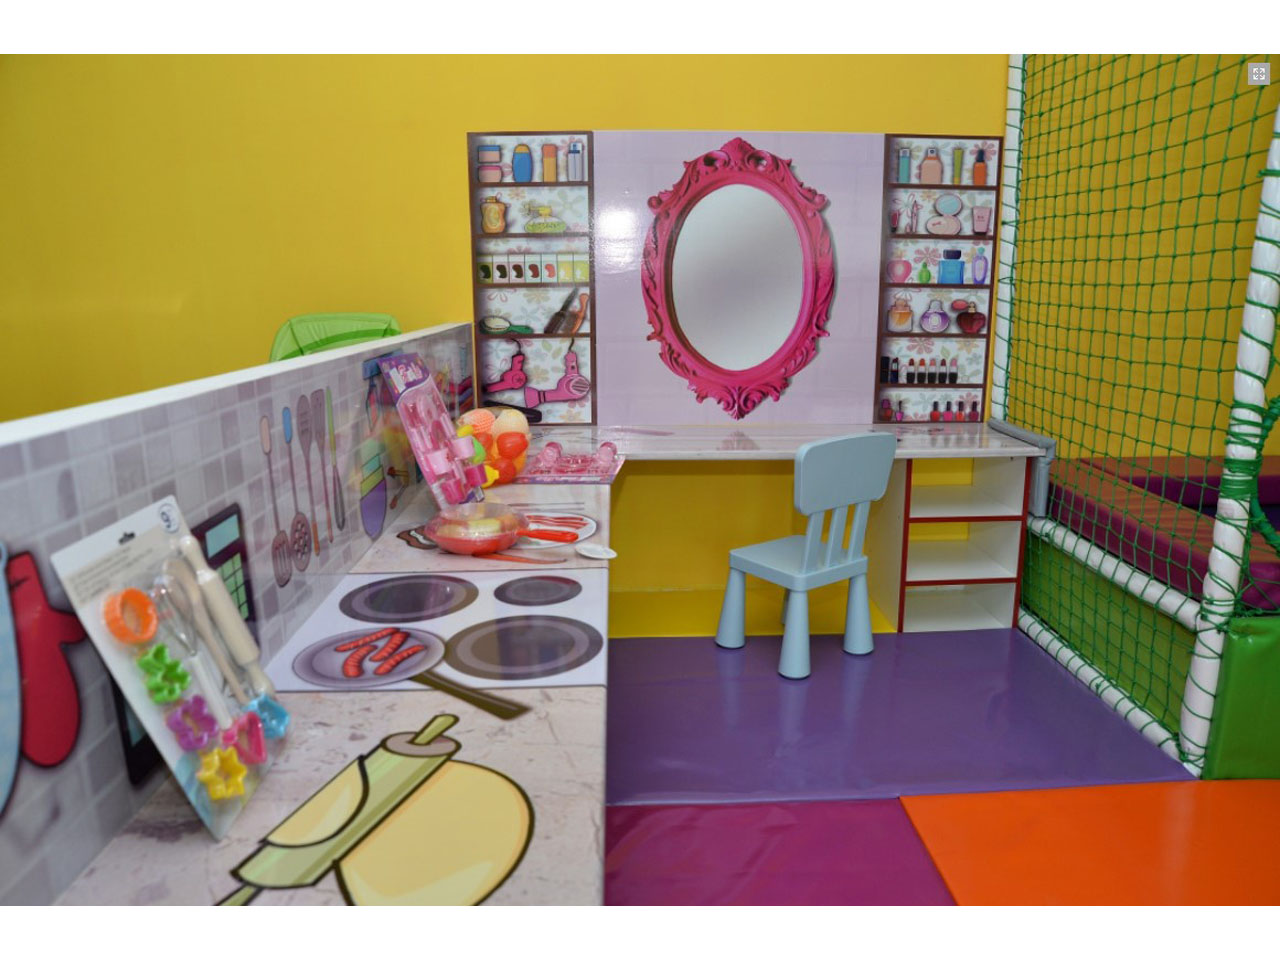 PLAYHOUSE AND BIRTHDAY SHOP CURANCE Dečije igraonice Beograd